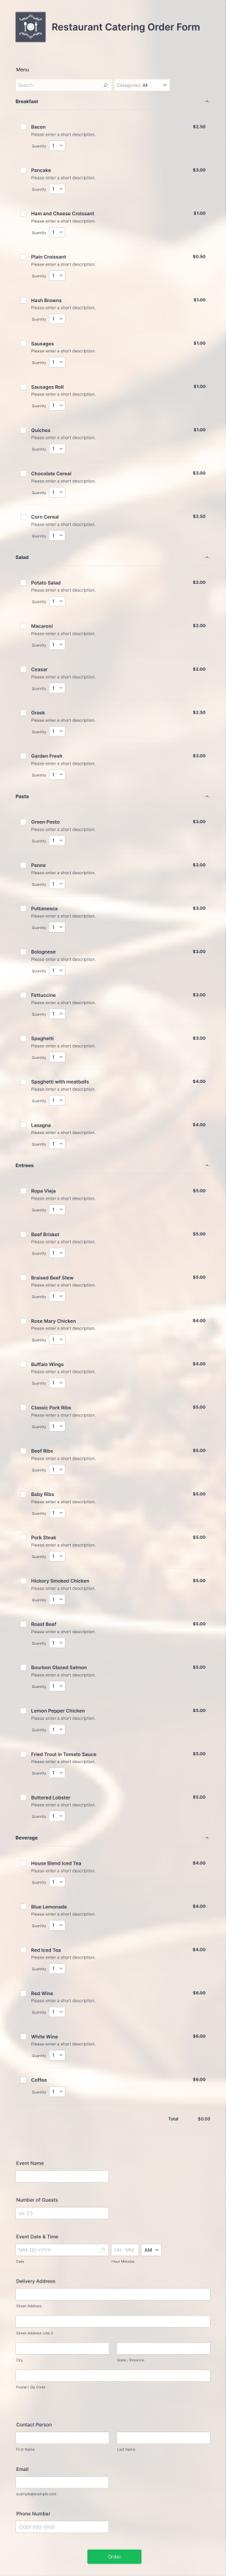 Restaurant Catering Order Form Template